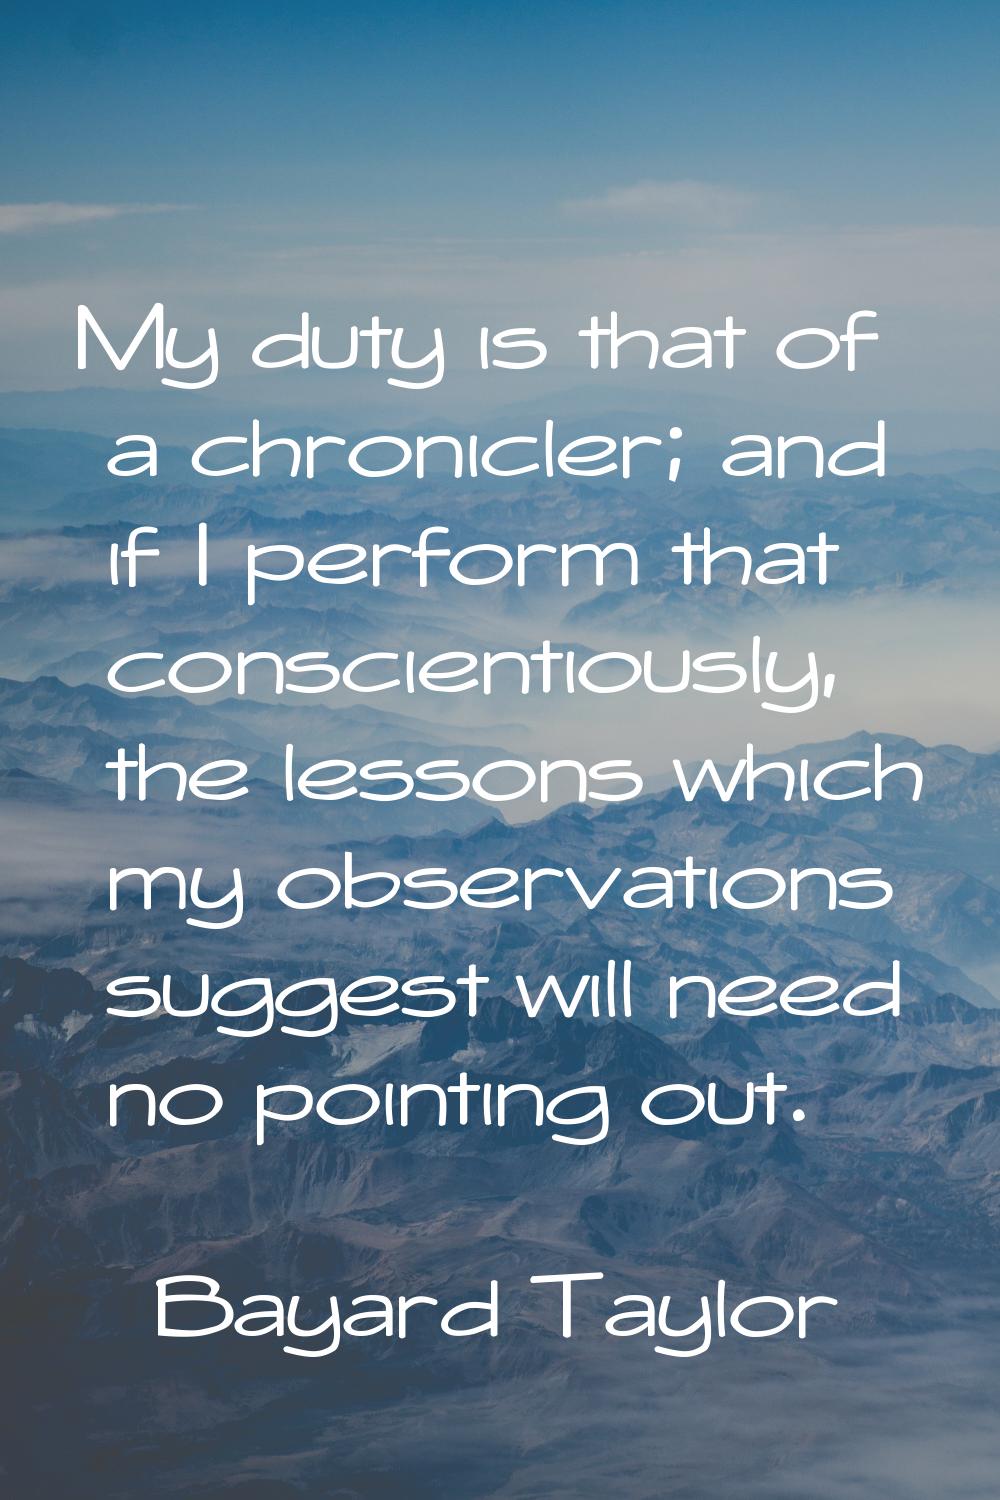 My duty is that of a chronicler; and if I perform that conscientiously, the lessons which my observ